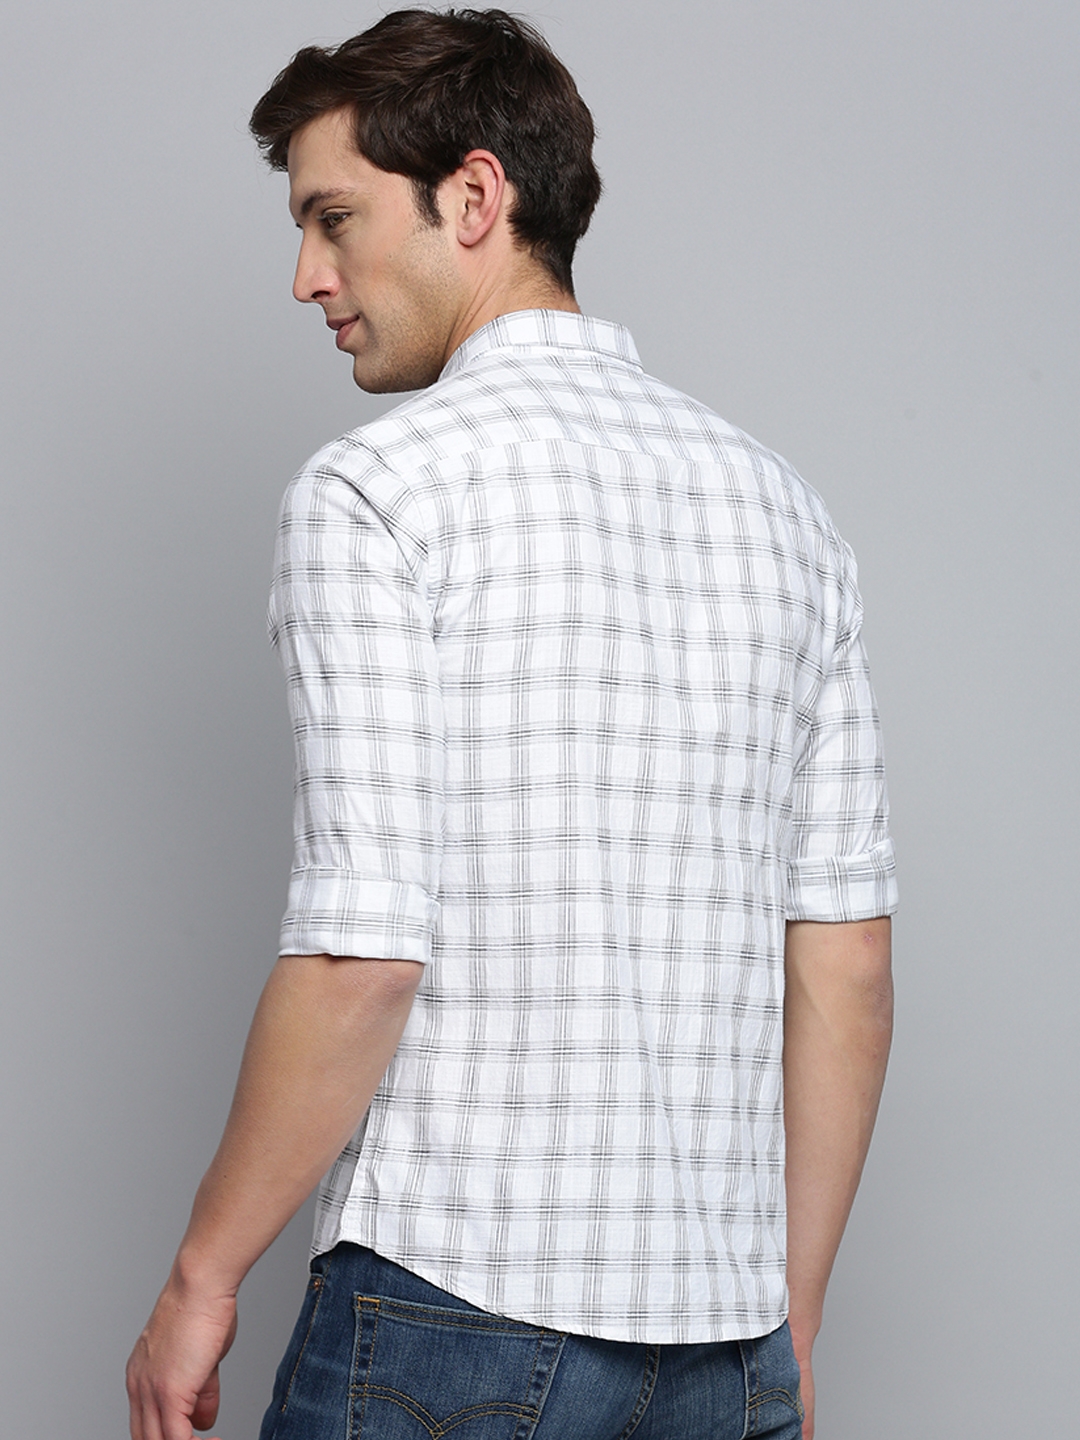 Showoff | SHOWOFF Men's Spread Collar Checked White Classic Shirt 3